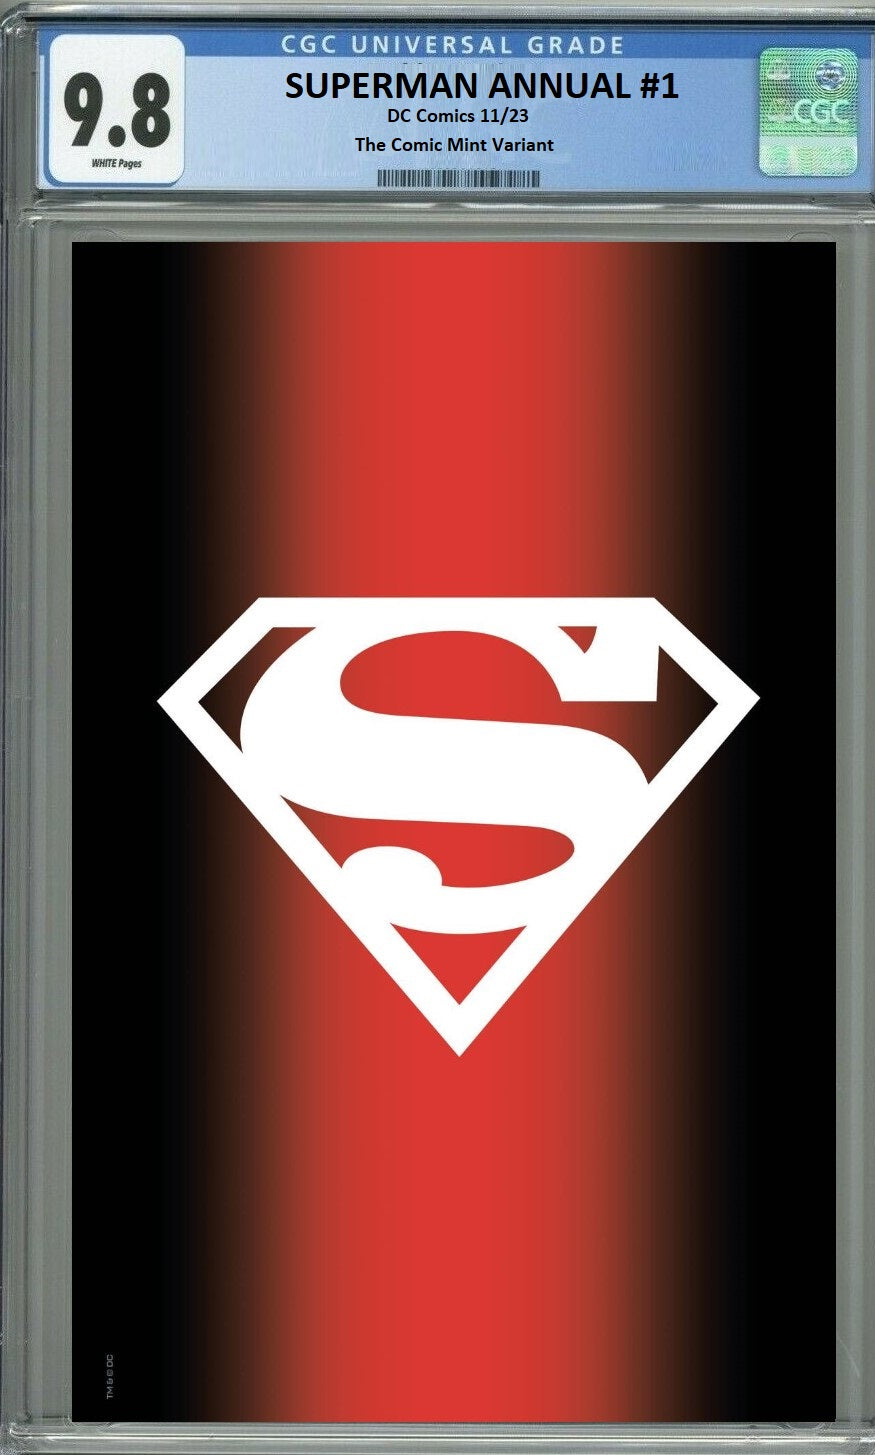 NYCC 2023 SUPERMAN ANNUAL #1 JUSTICE LEAGUE LOGO FOIL VARIANT LIMITED TO 1200 COPIES - RAW & GRADED OPTIONS